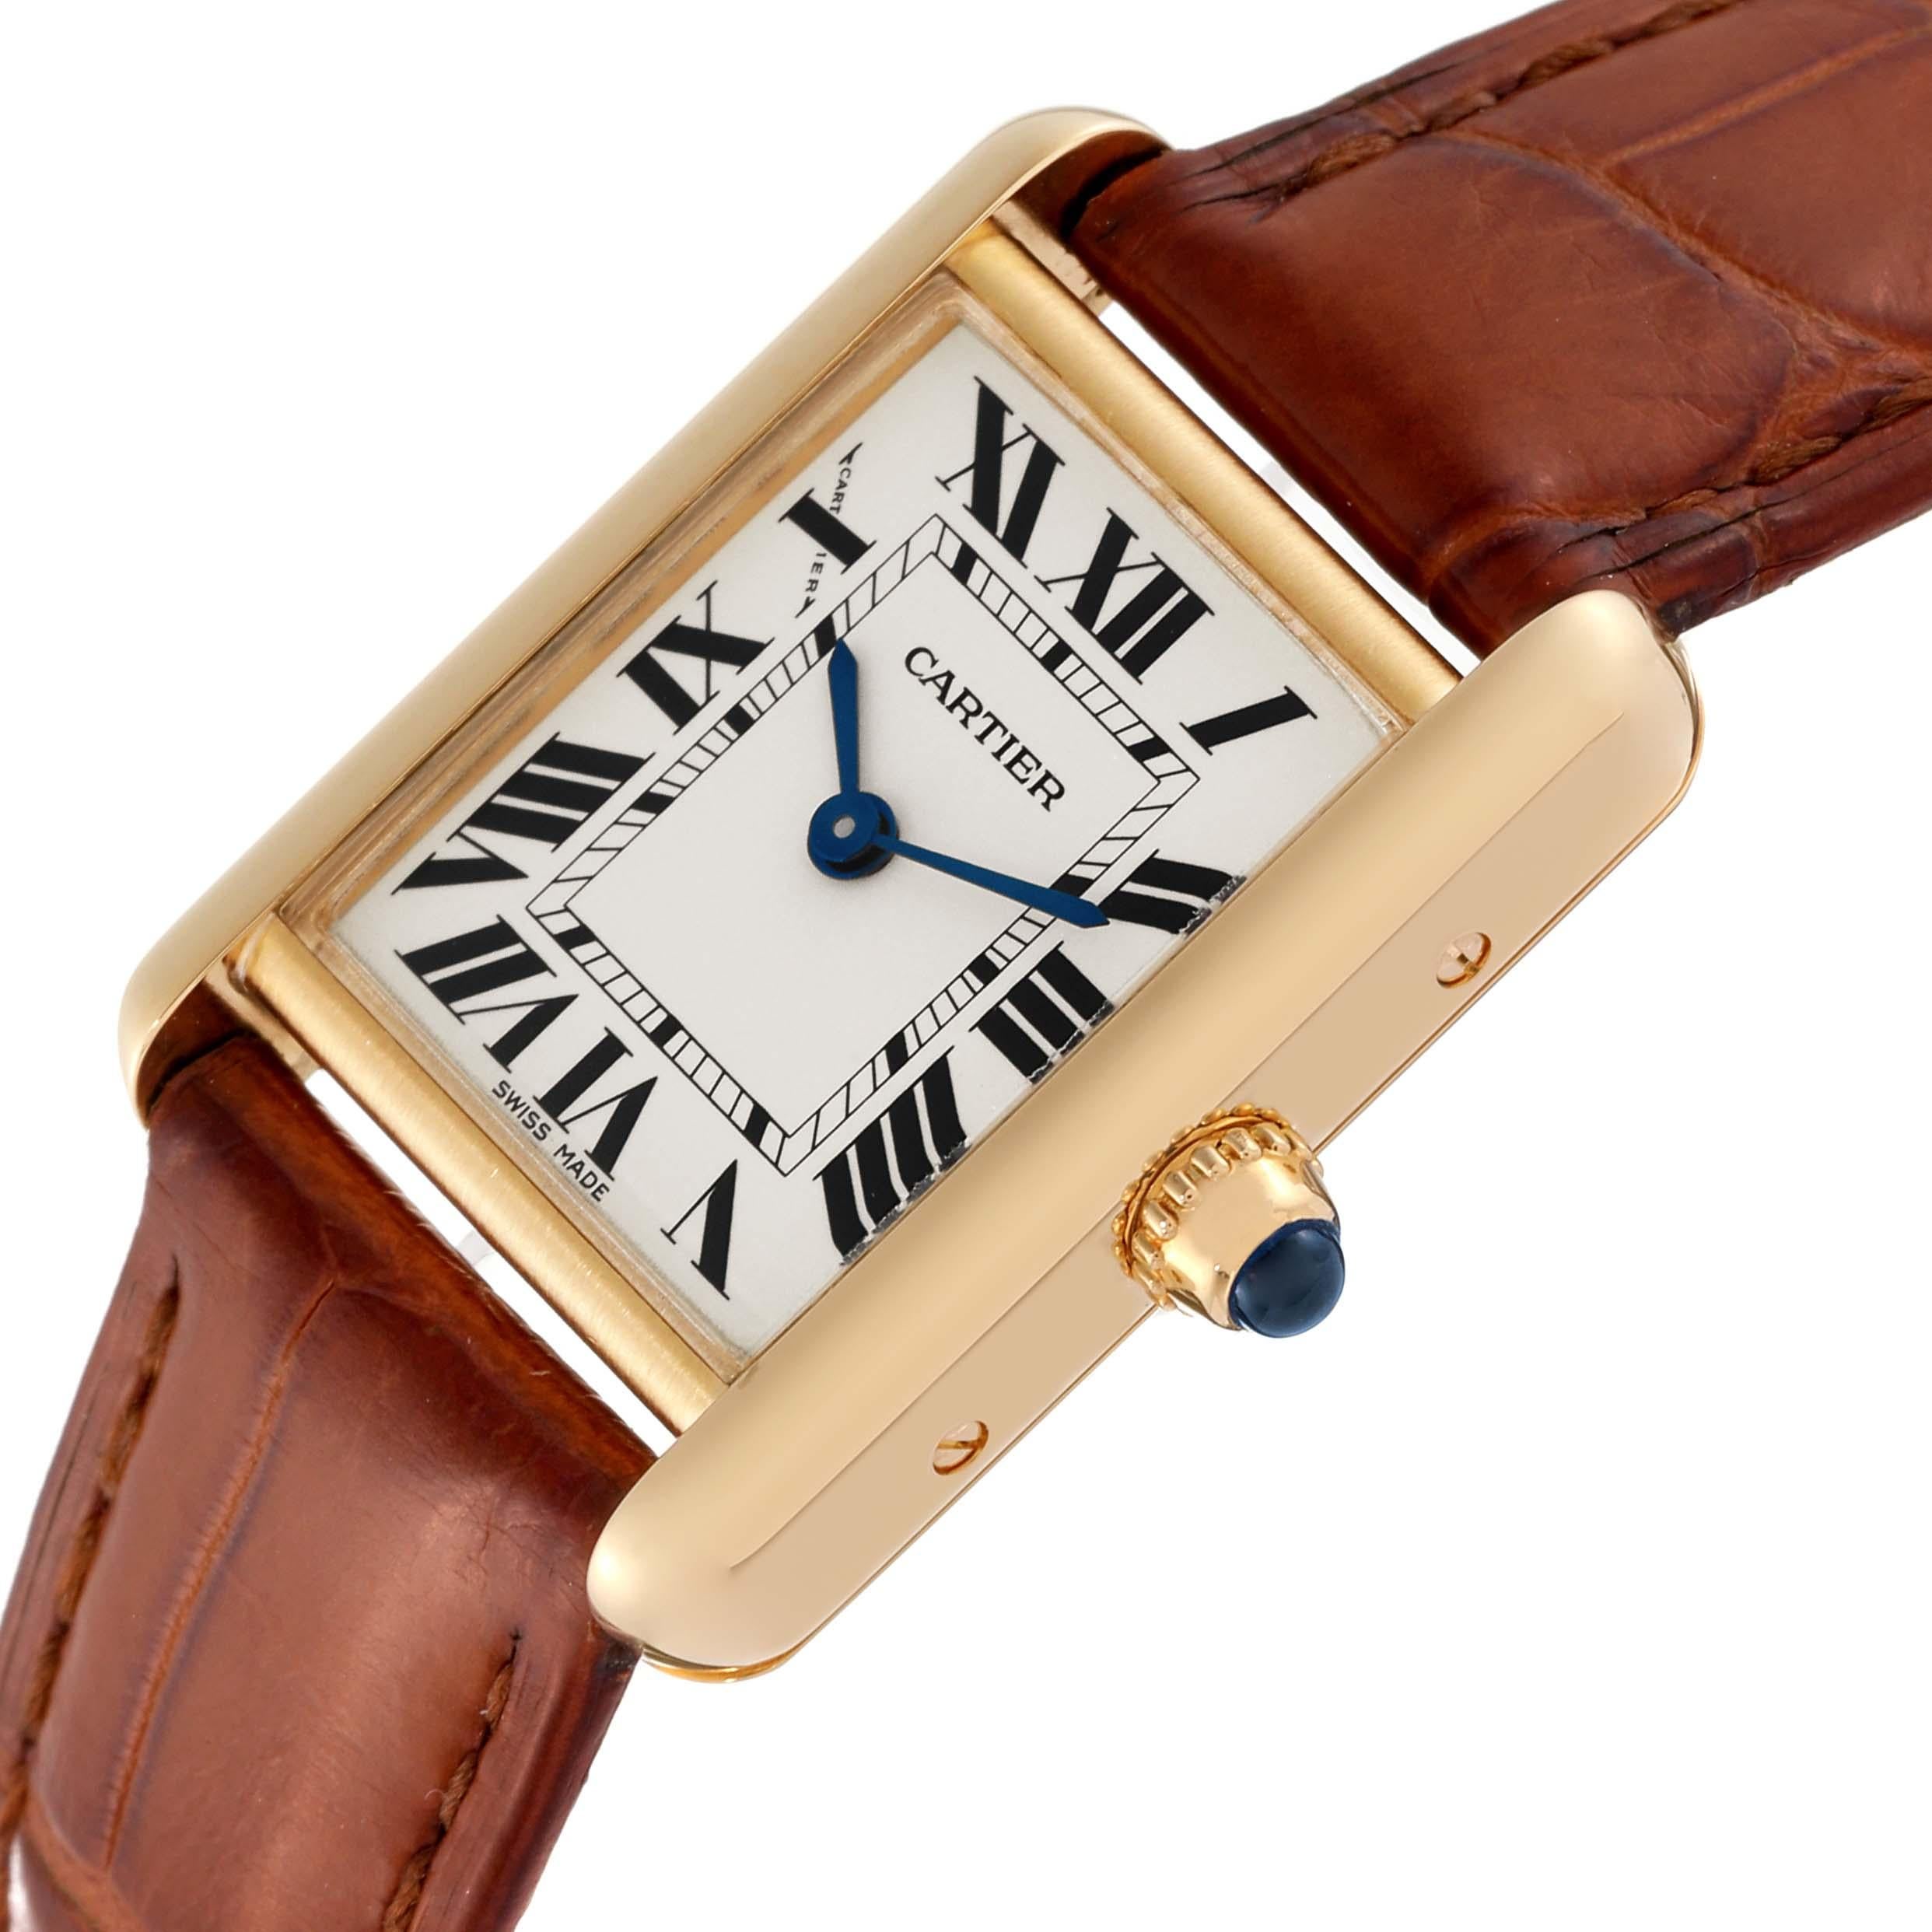 Cartier Tank Louis Small Yellow Gold Brown Strap Ladies Watch W1529856. Quartz movement. 18k yellow gold case 29.0 x 22.0 mm. Circular grained crown set with a blue sapphire cabochon. . Scratch resistant mineral crystal. Silvered grained dial with